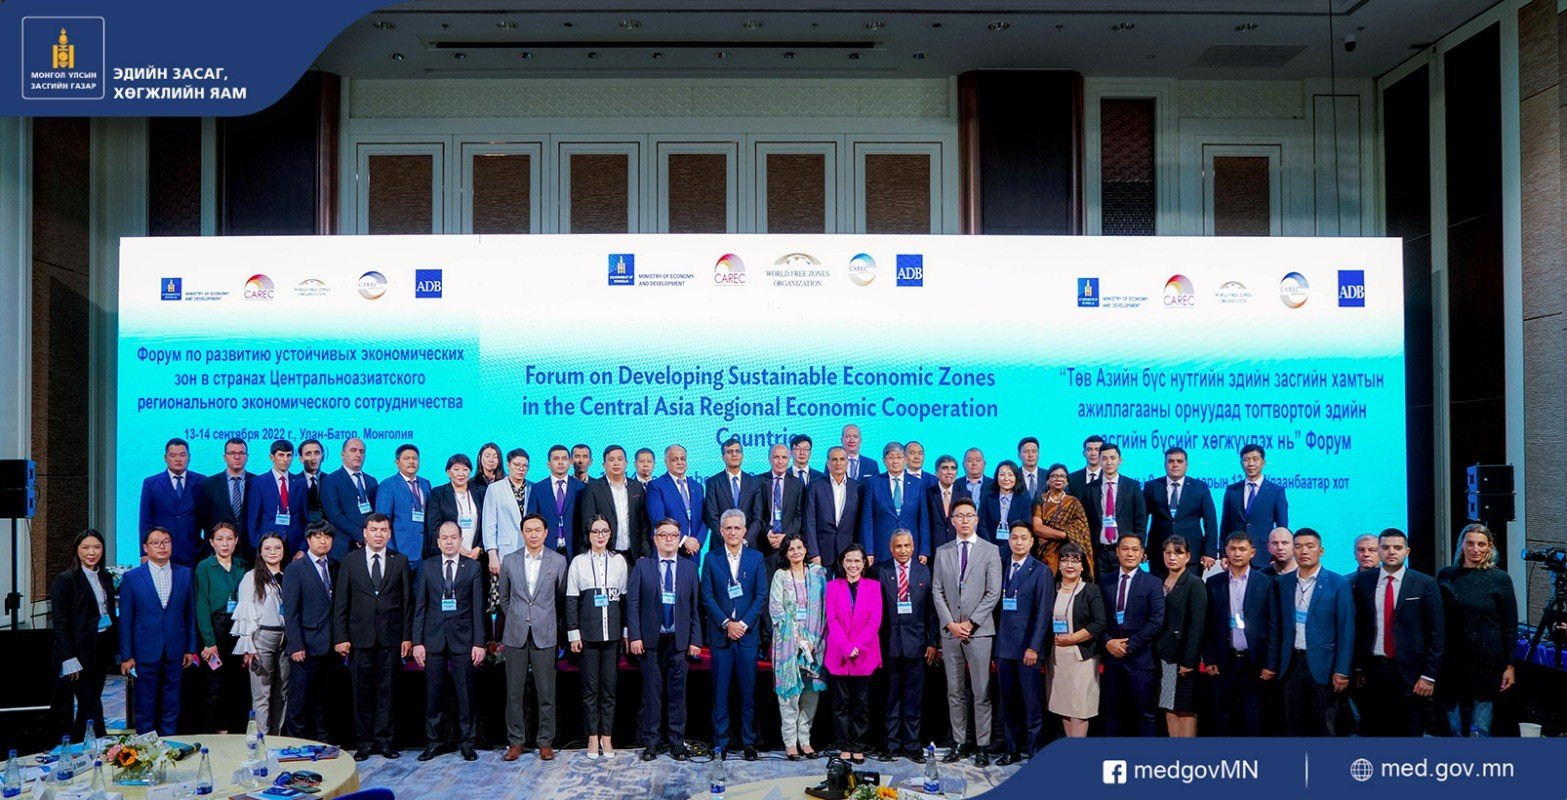 CENTRAL ASIAN REGIONAL ECONOMIC COOPERATION SERIES OF EVENTS IN ULAANBAATAR